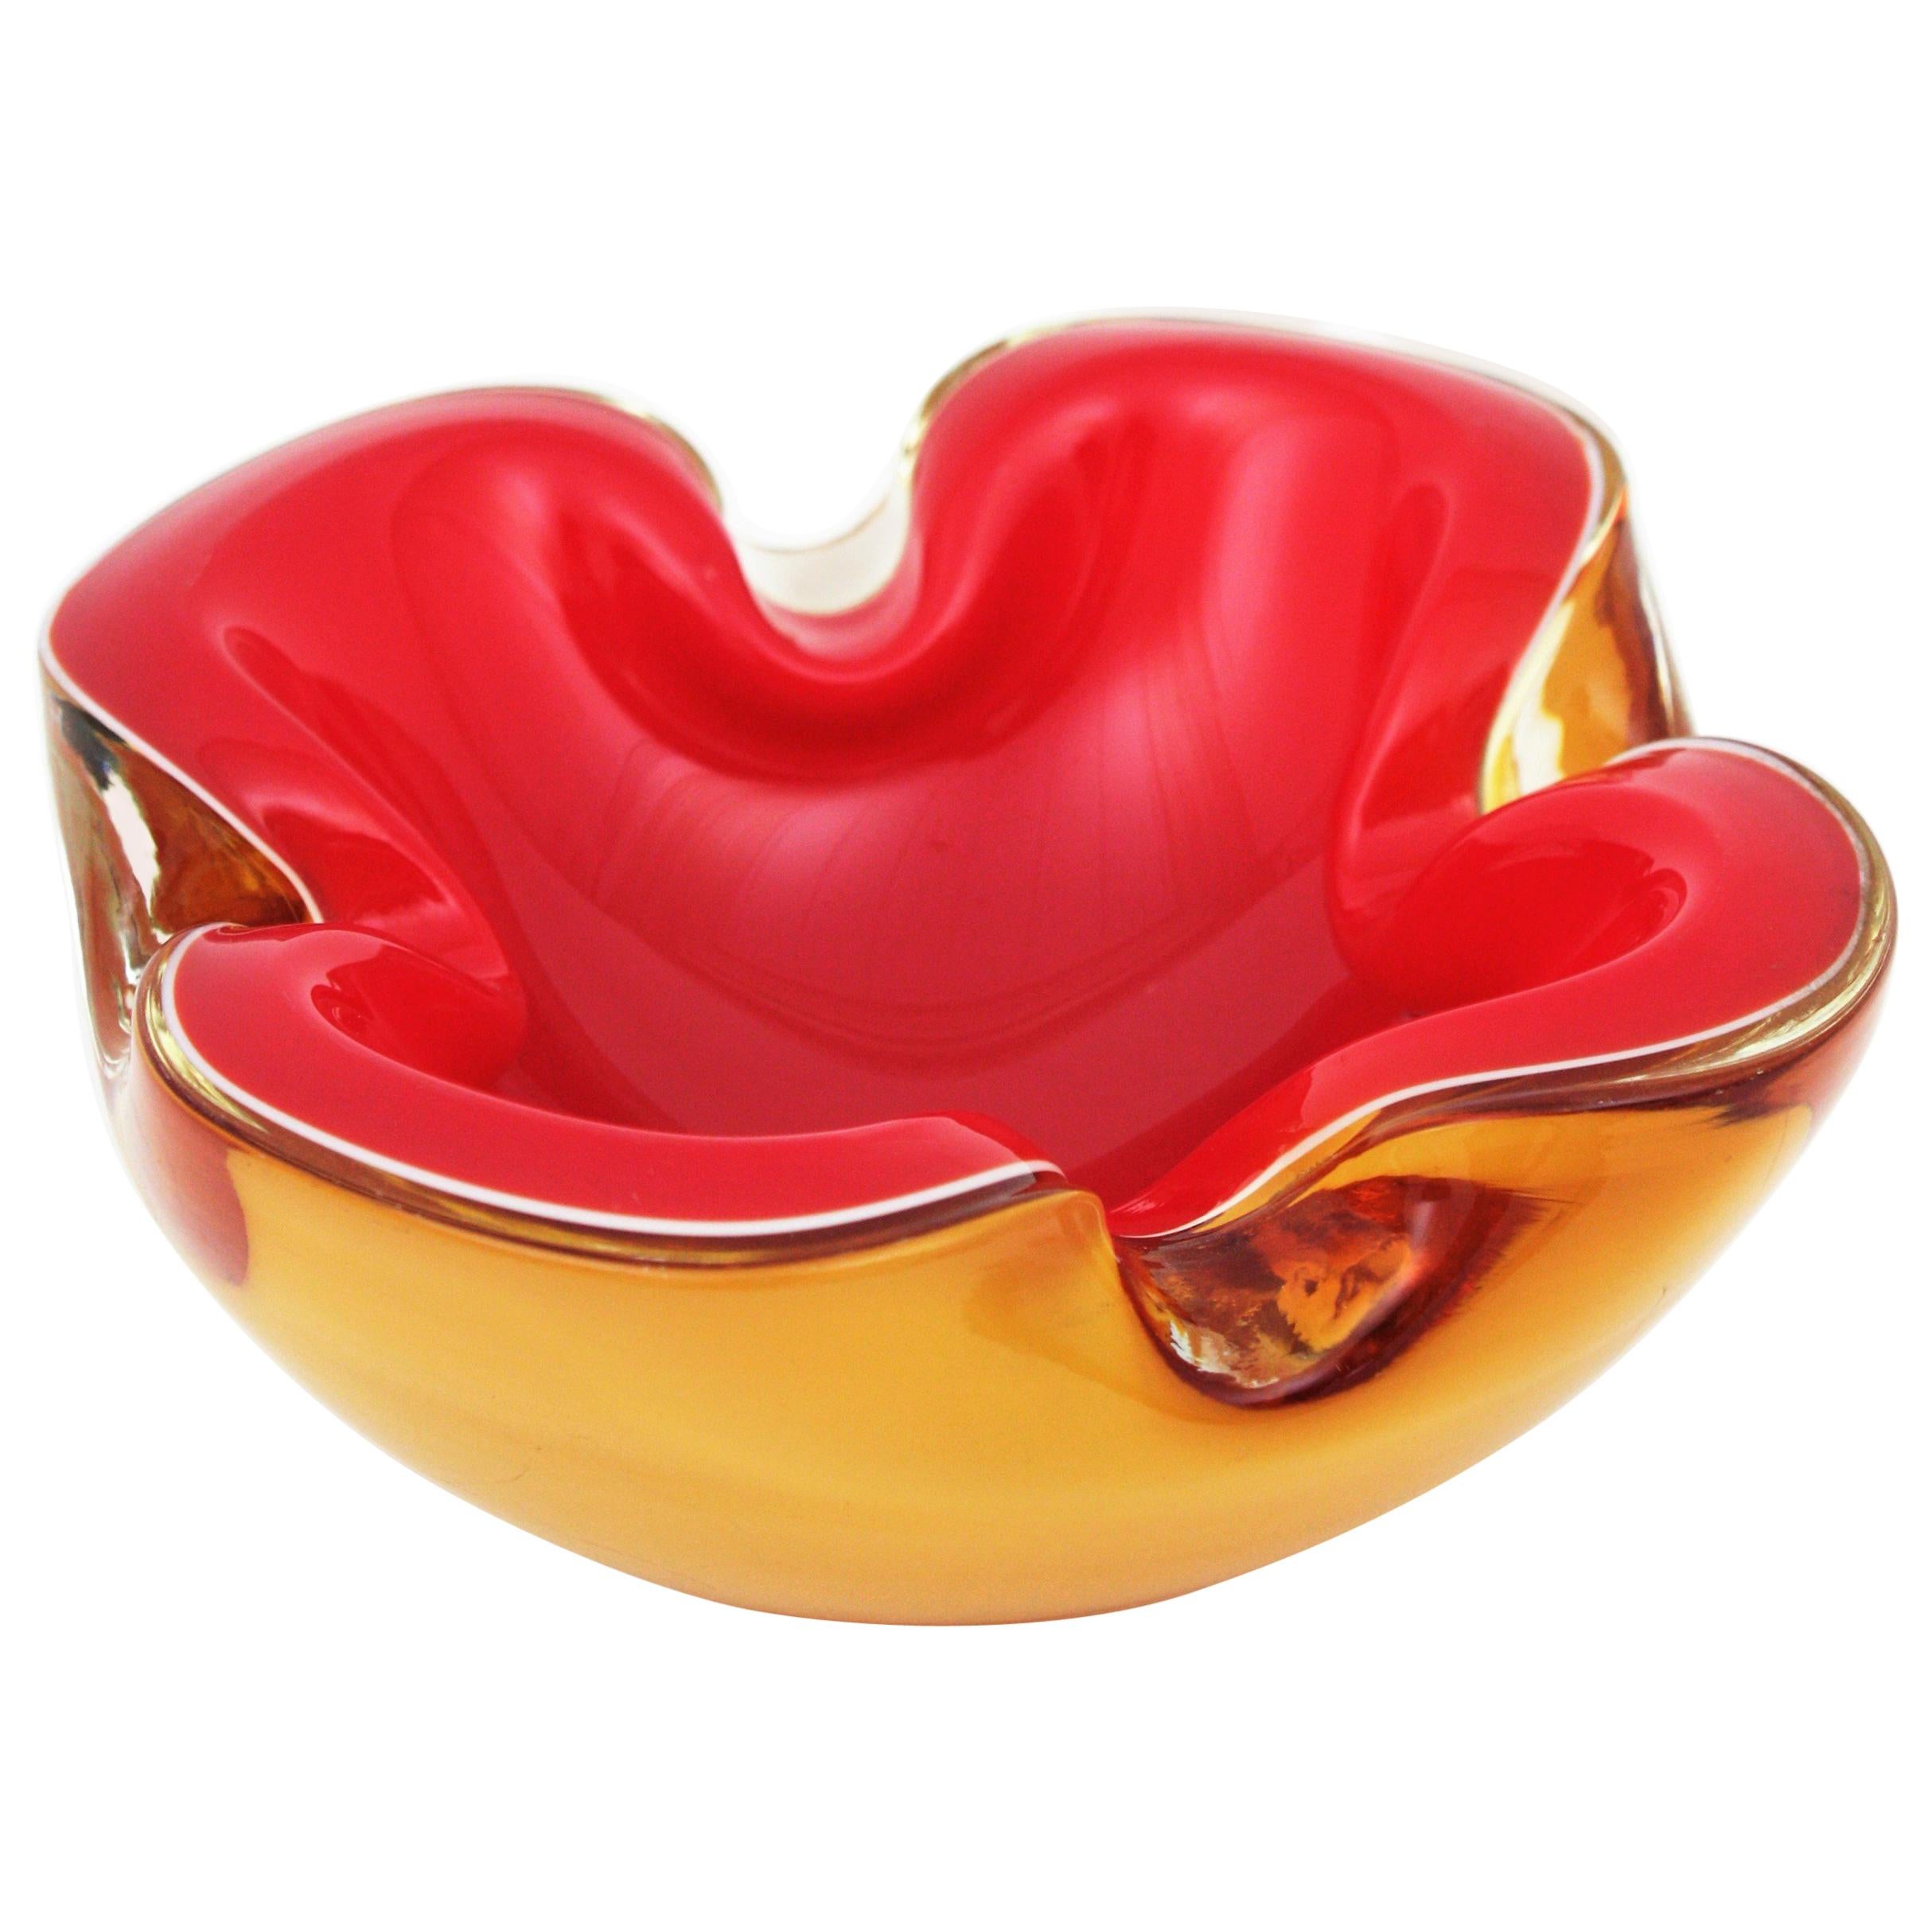 Mid-Century Modern Italian Red and Amber Sommerso Murano Glass Bowl or Ashtray